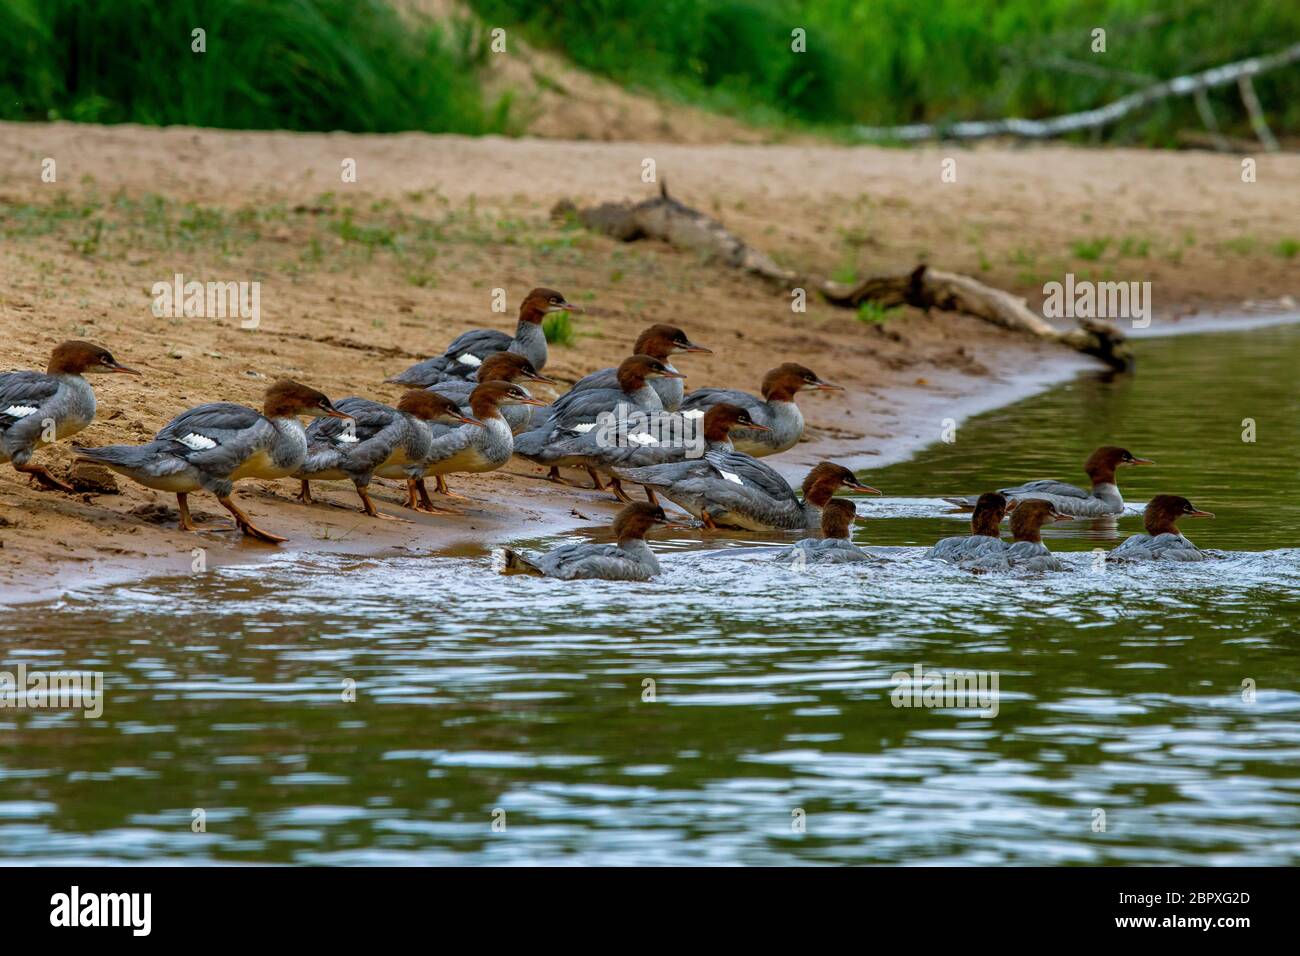 Ducks swimming in the river Gauja. Ducks on coast of river Gauja in Latvia. Duck is a waterbird with a broad blunt bill, short legs, webbed feet, and Stock Photo